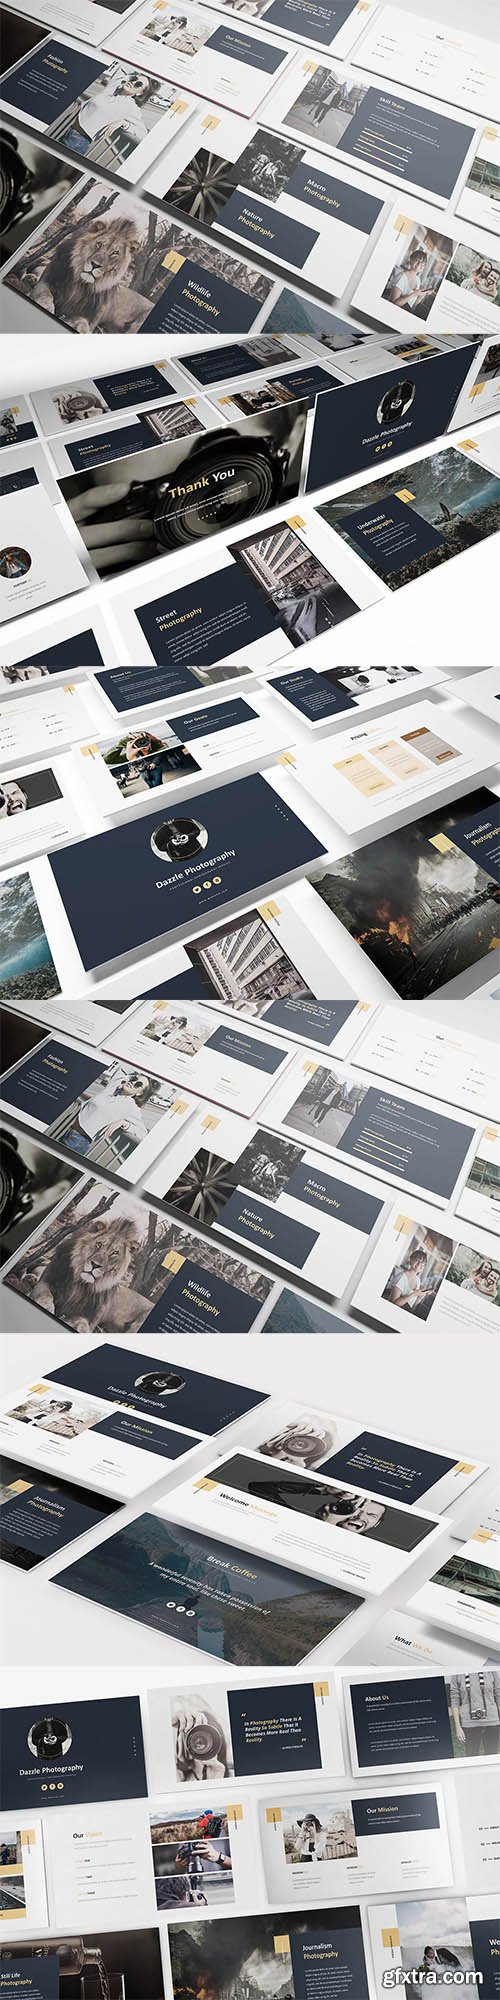 Dazzle Photography Powerpoint Template